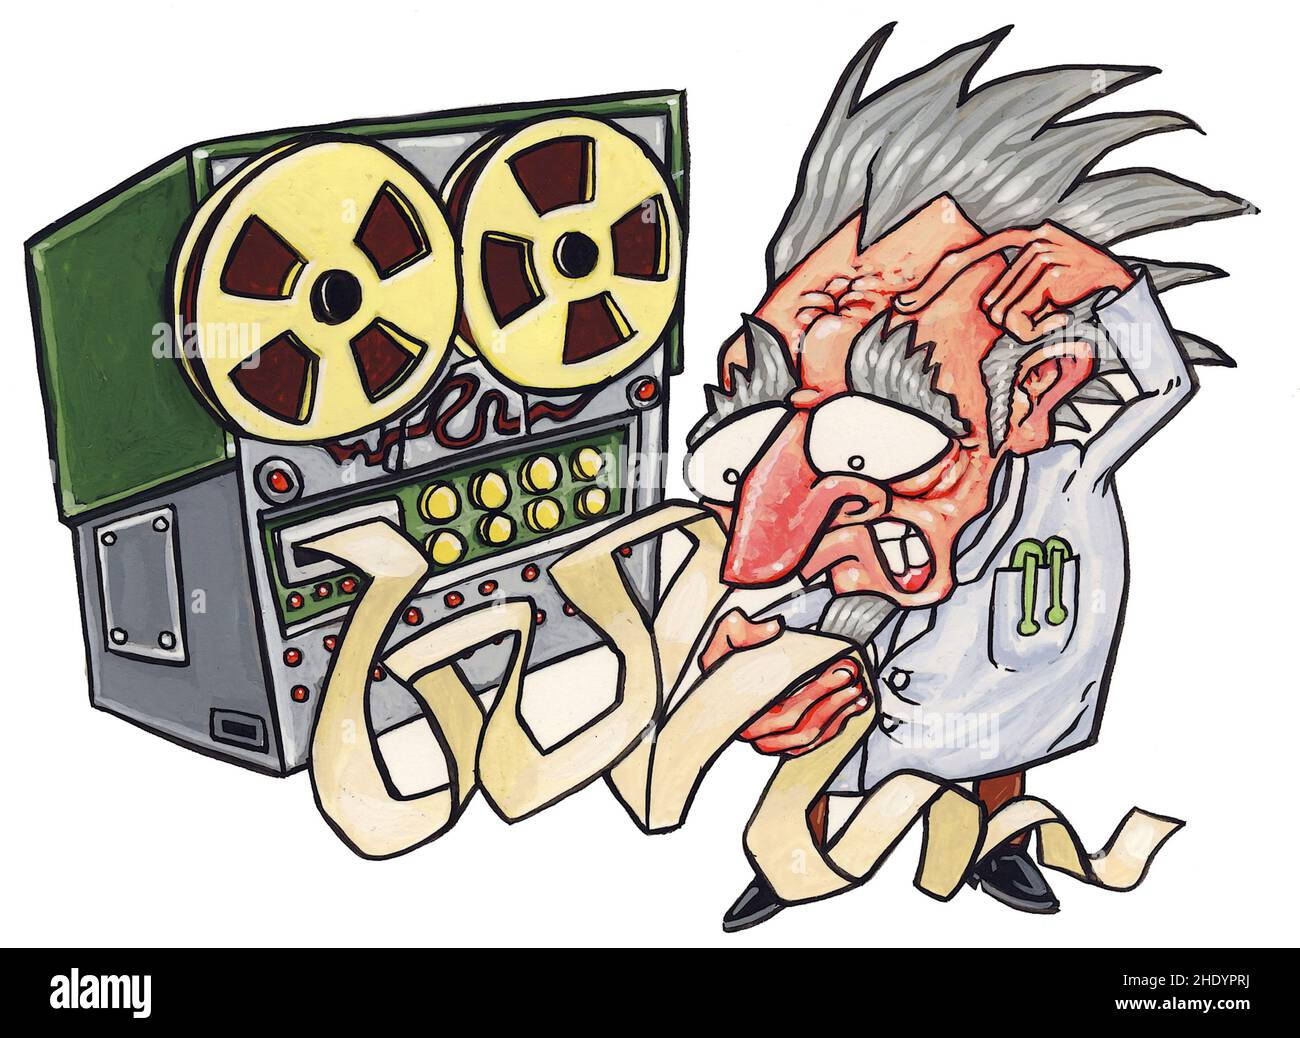 Cartoon comic art illustration showing a 1960s technician scientist working on an Honeywell style tape-drive computer with a dot-matrix paper readout. Stock Photo